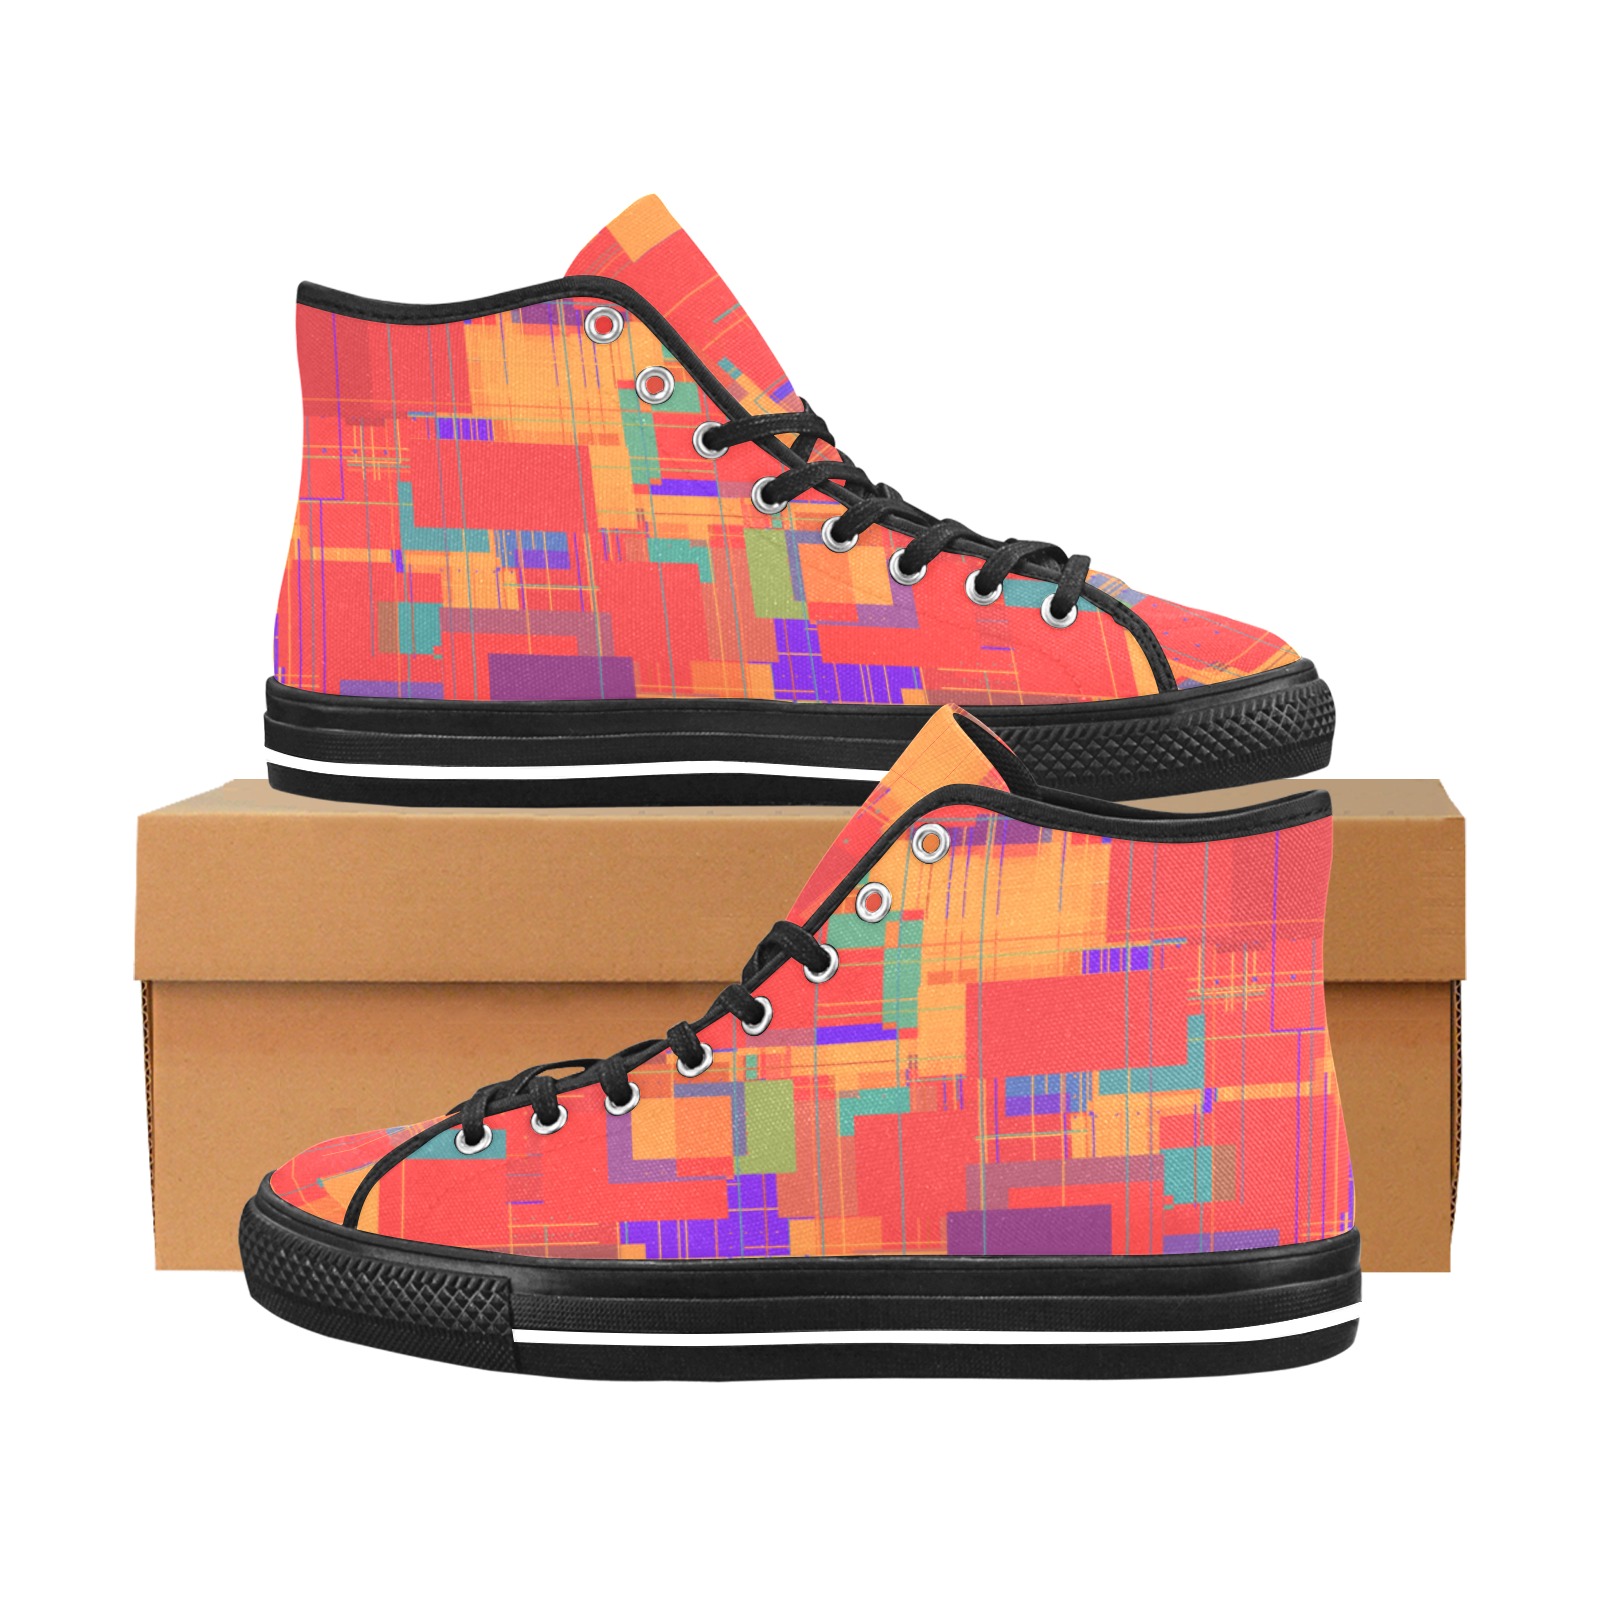 Random Shapes Abstract Pattern Vancouver H Men's Canvas Shoes (1013-1)